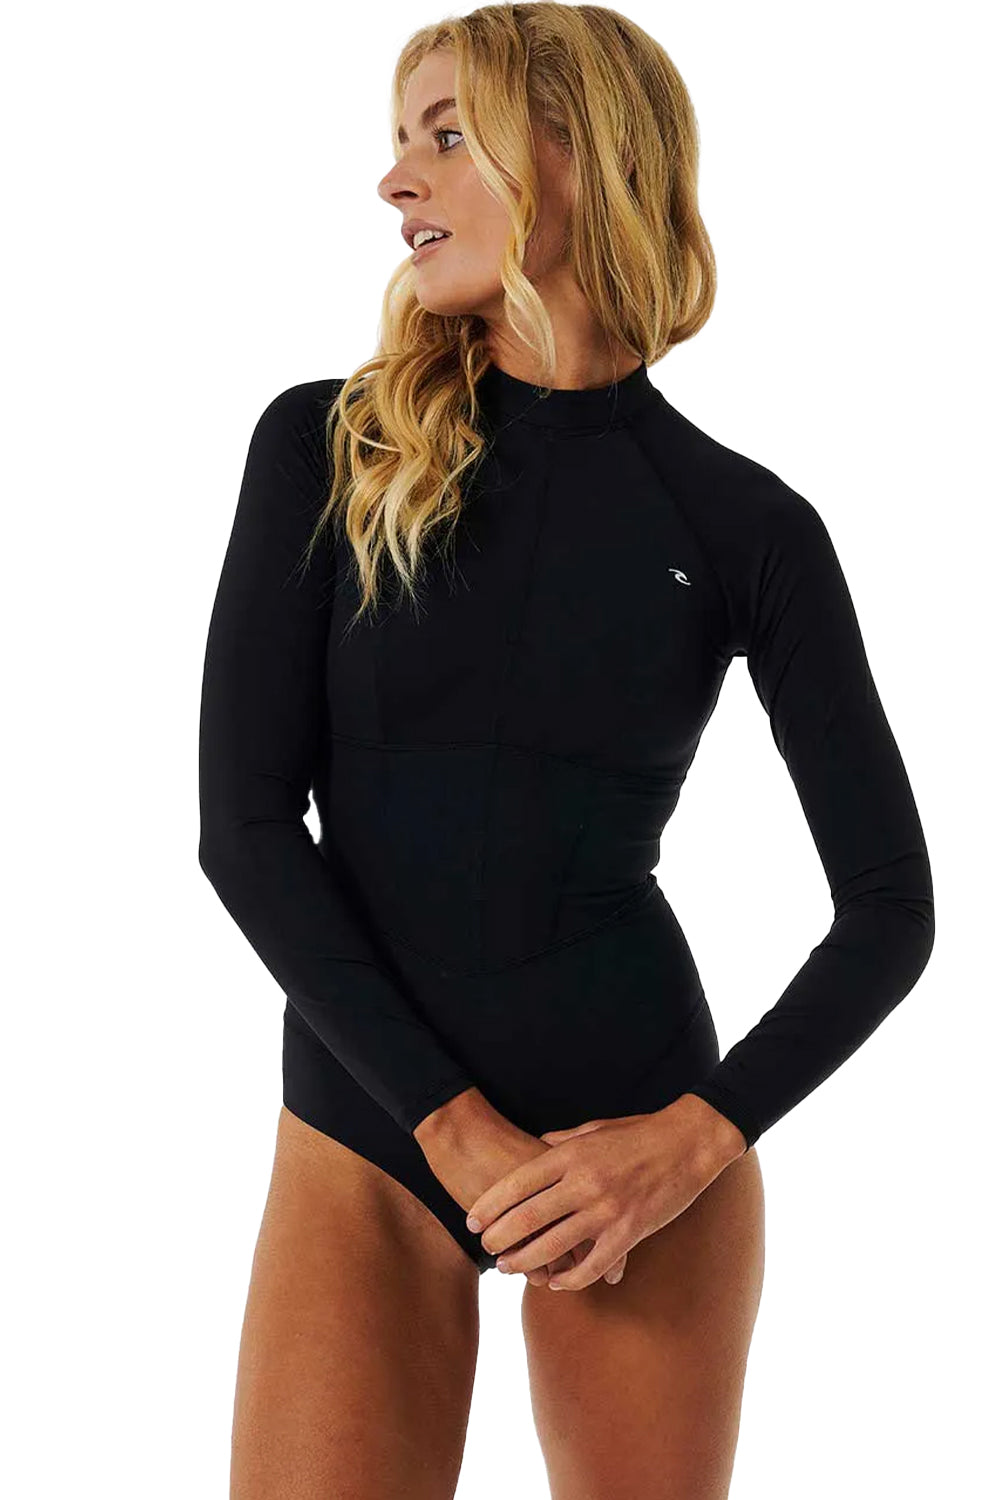 Rip Curl Mirage Ultimate Long Sleeve UPF Surf Suit